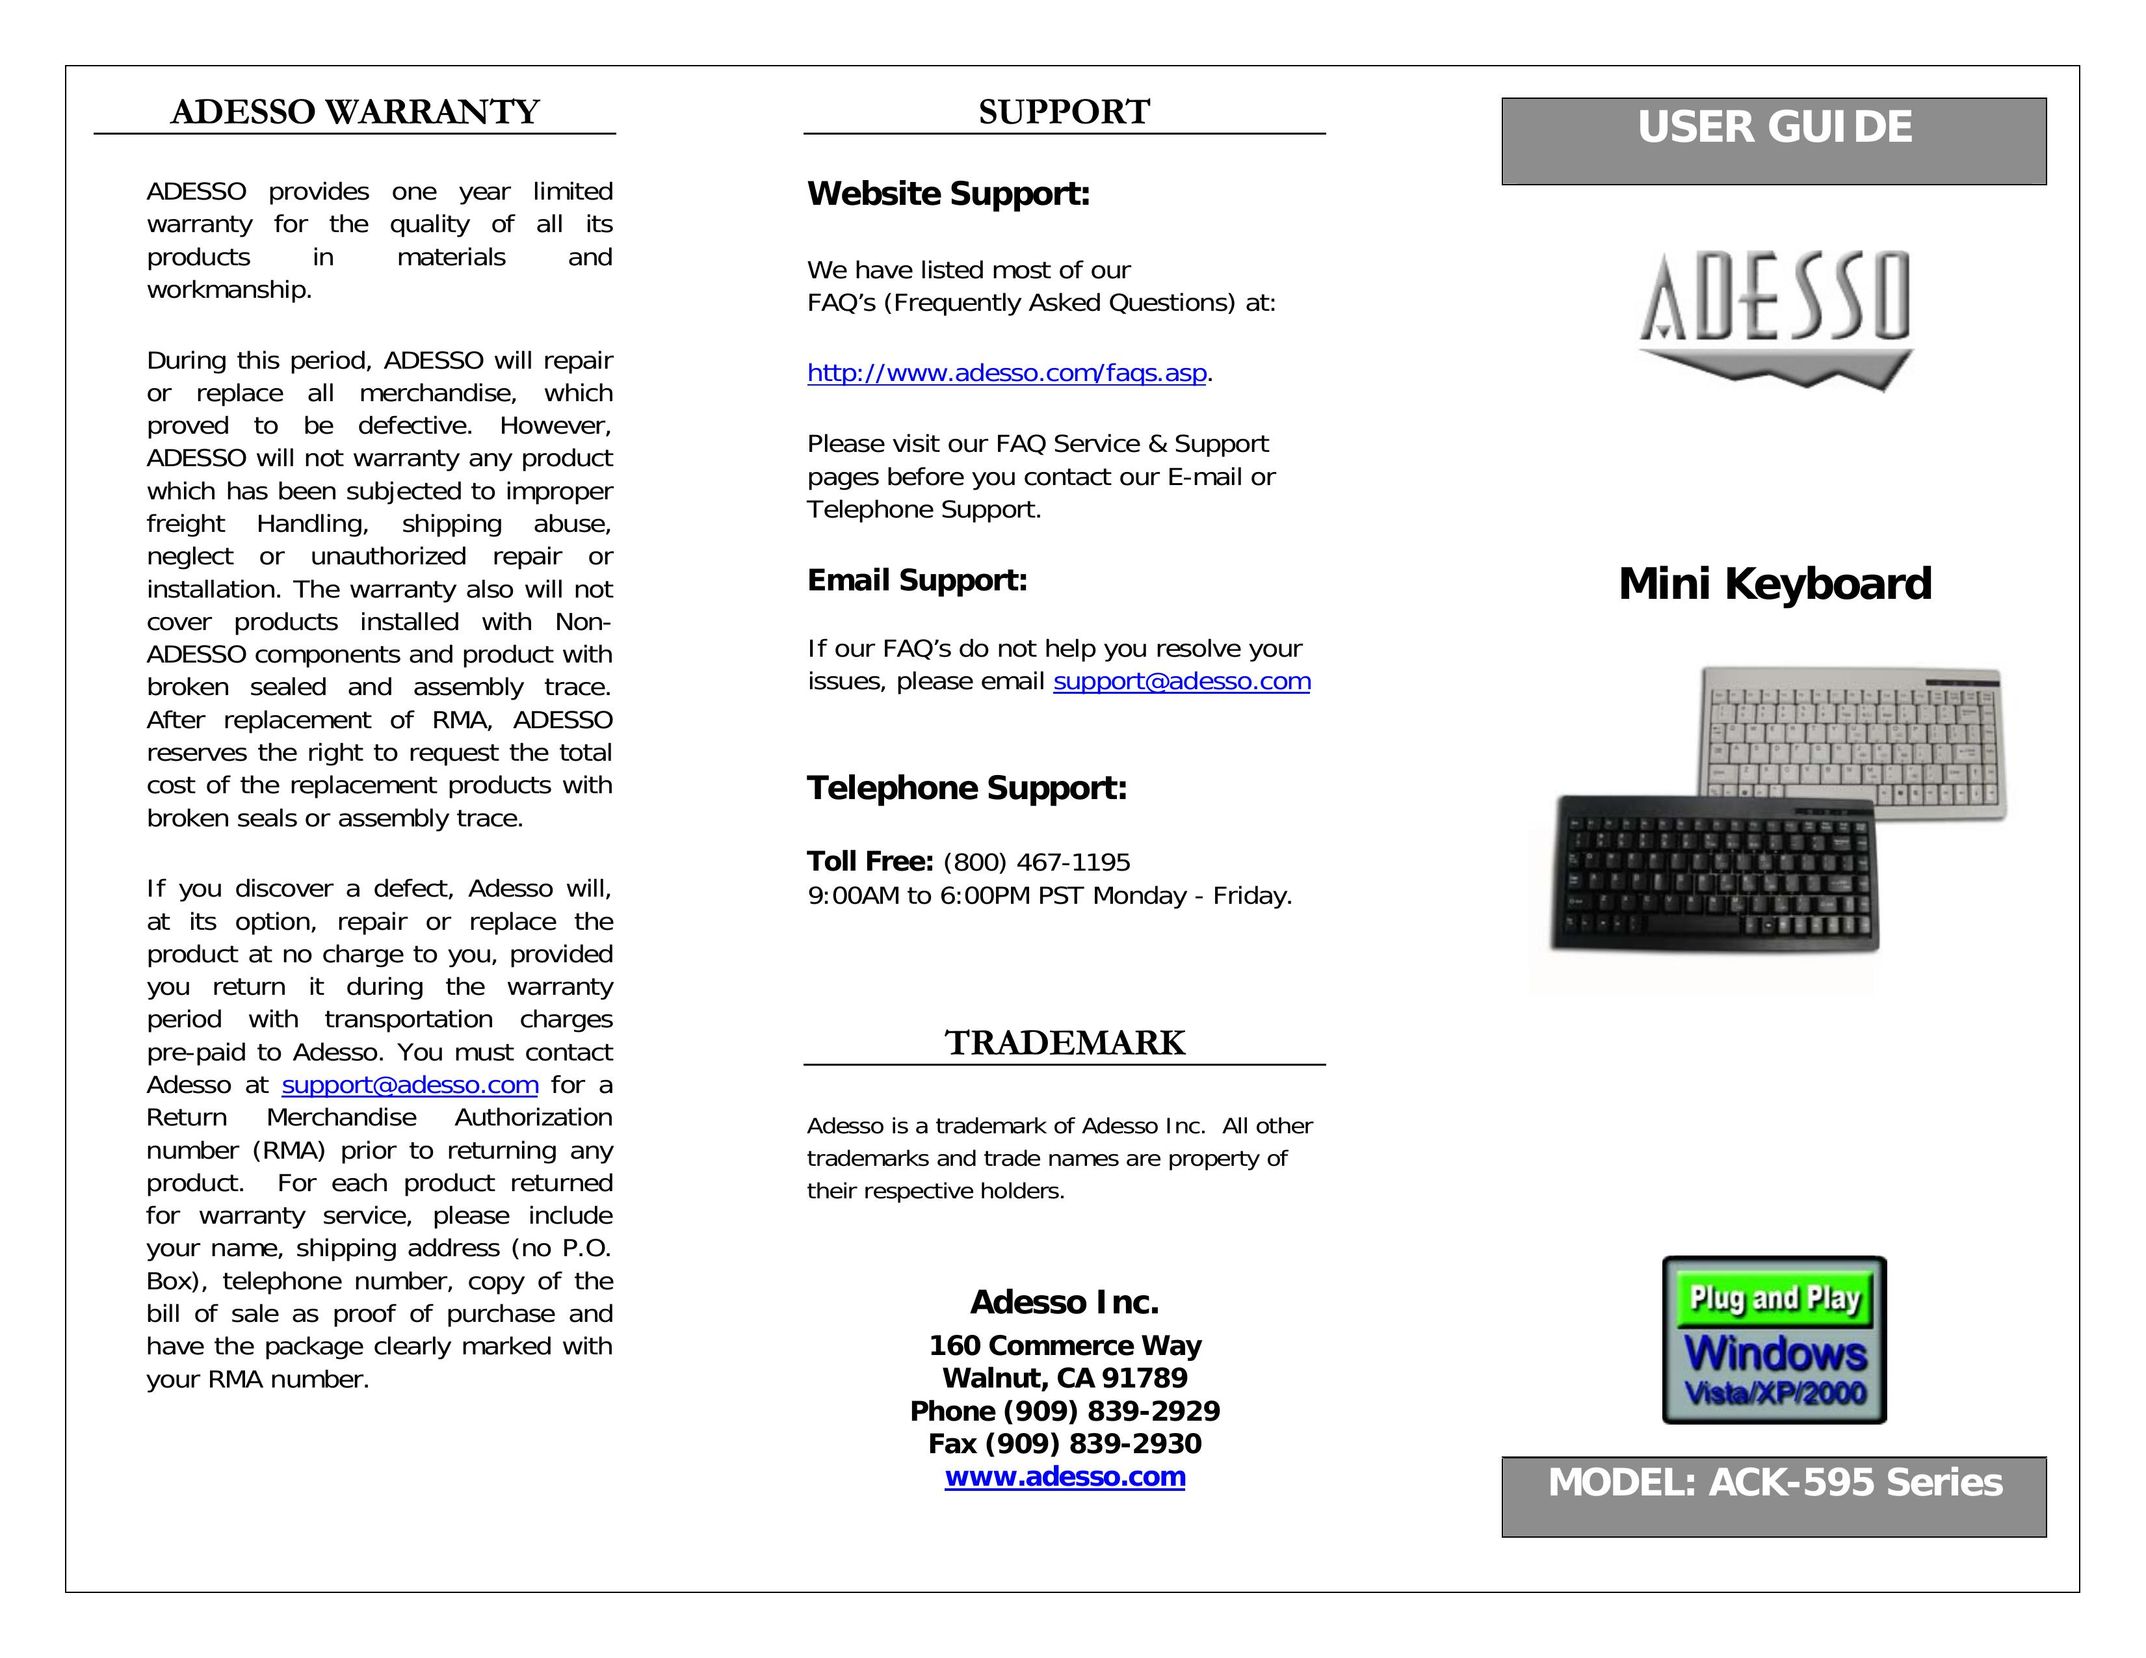 Adesso ACK-595 Mouse User Manual